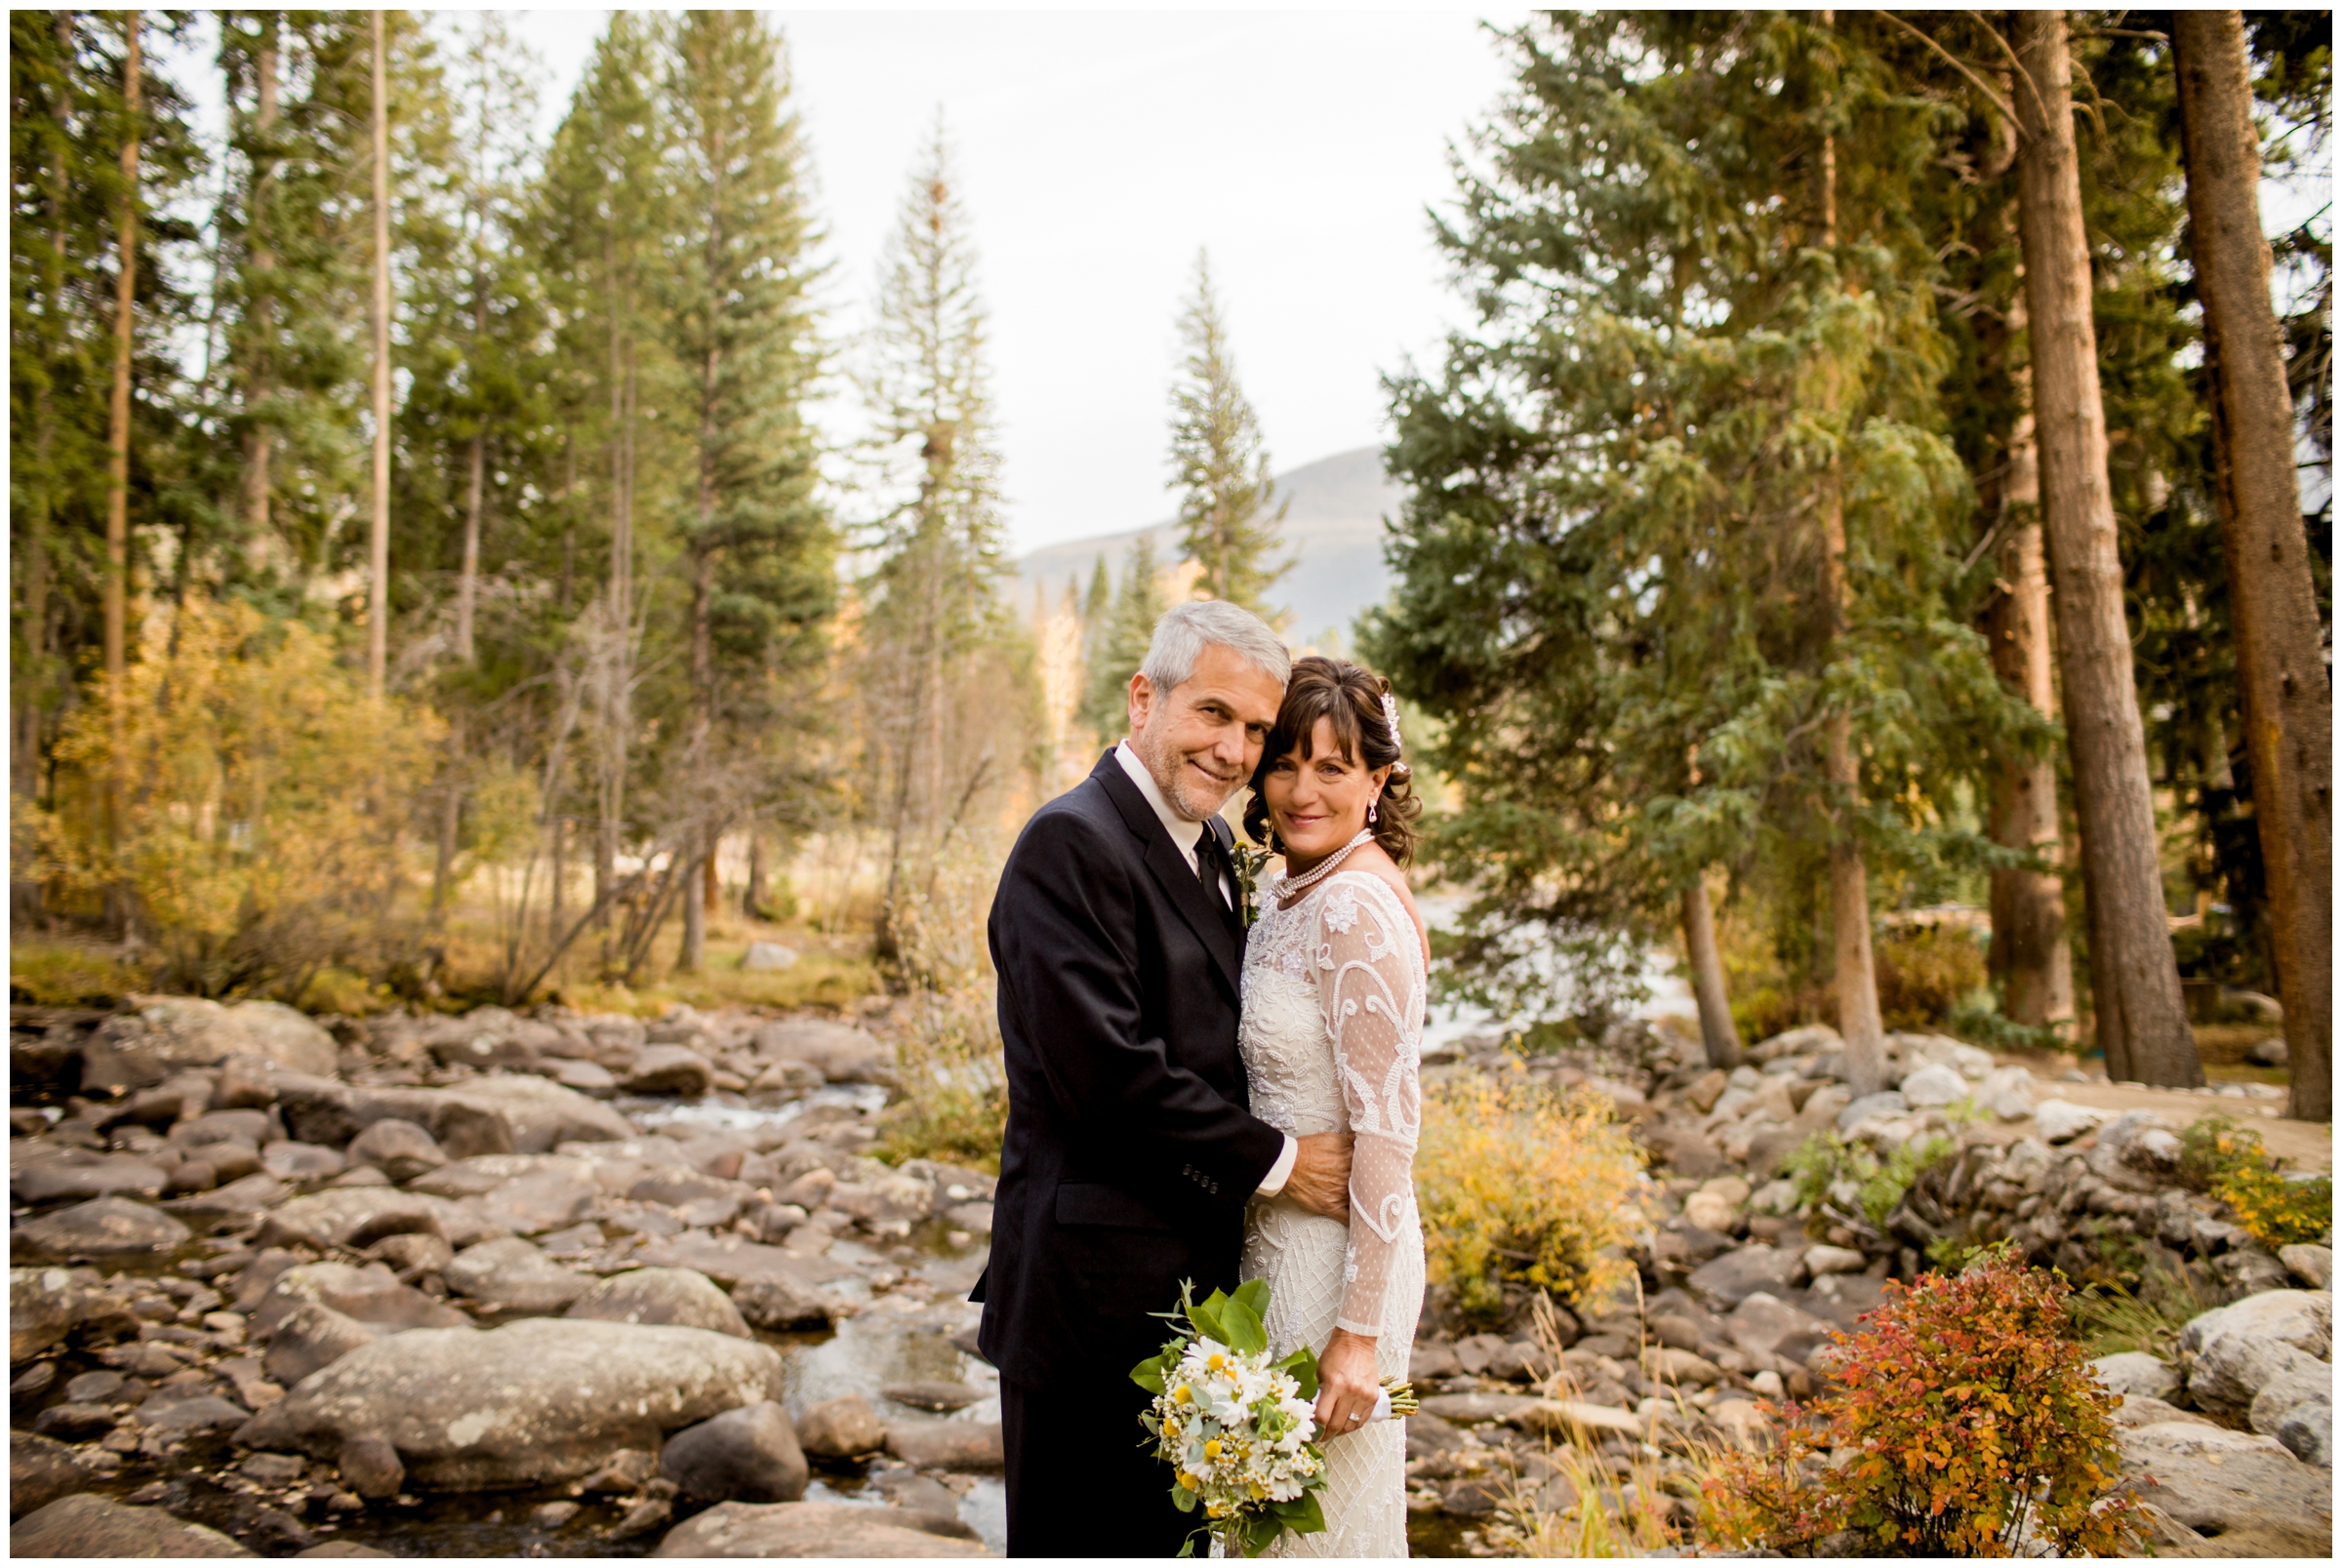 Grand Lake wedding photos at Point Park by Colorado mountain elopement photographer Plum Pretty Photography